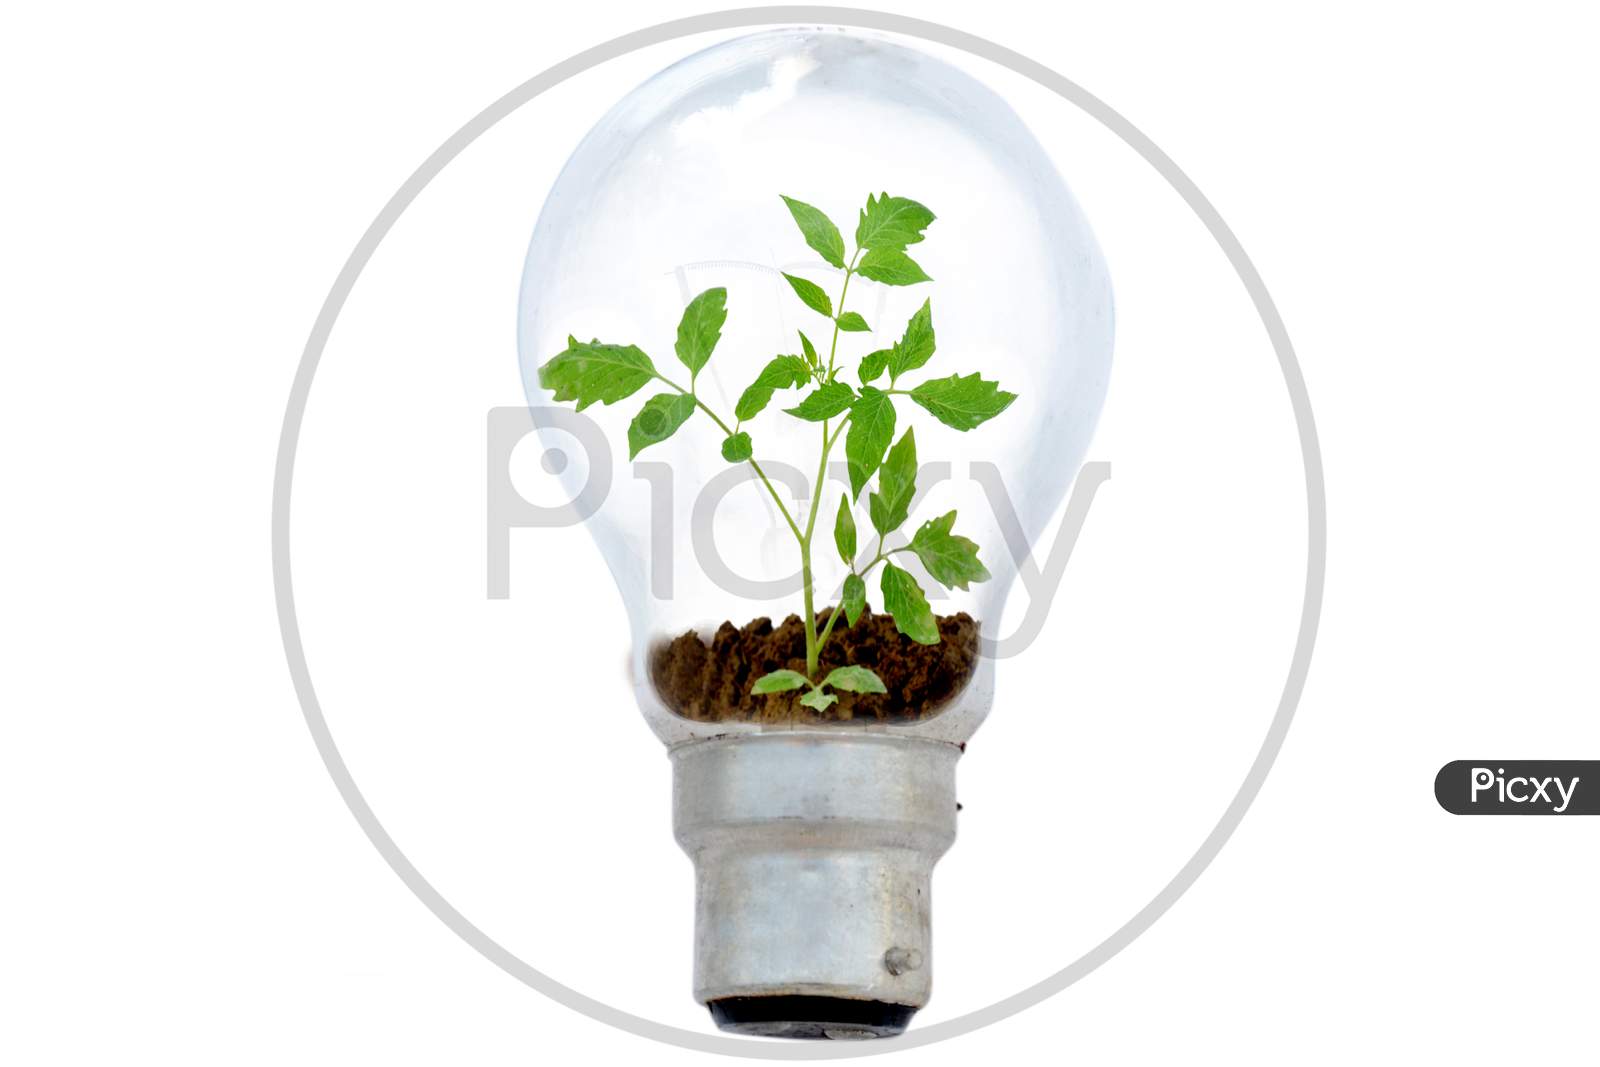 Tomato Plant Seedling In The Bulb Environment Conversation Concept Isolated On White .